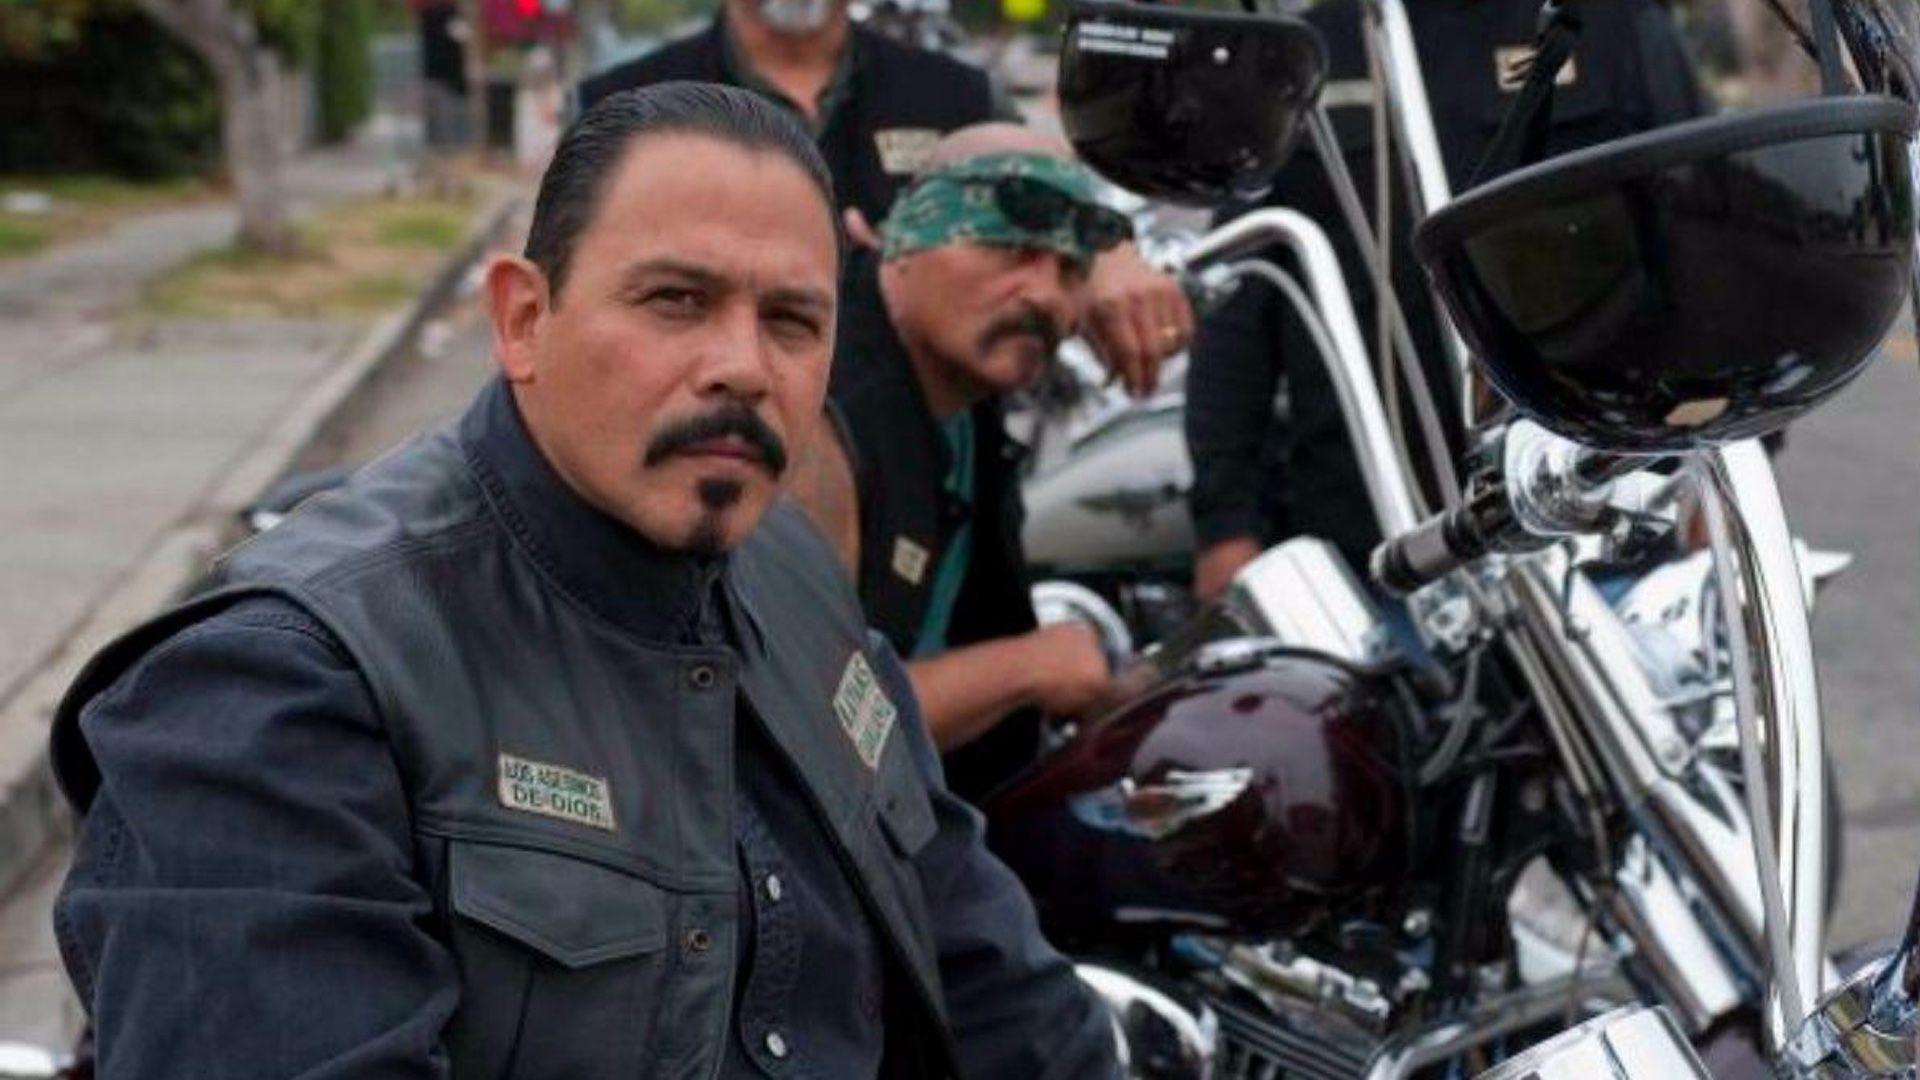 FX Gives The SONS OF ANARCHY Spinoff Series MAYANS MC a Full Season